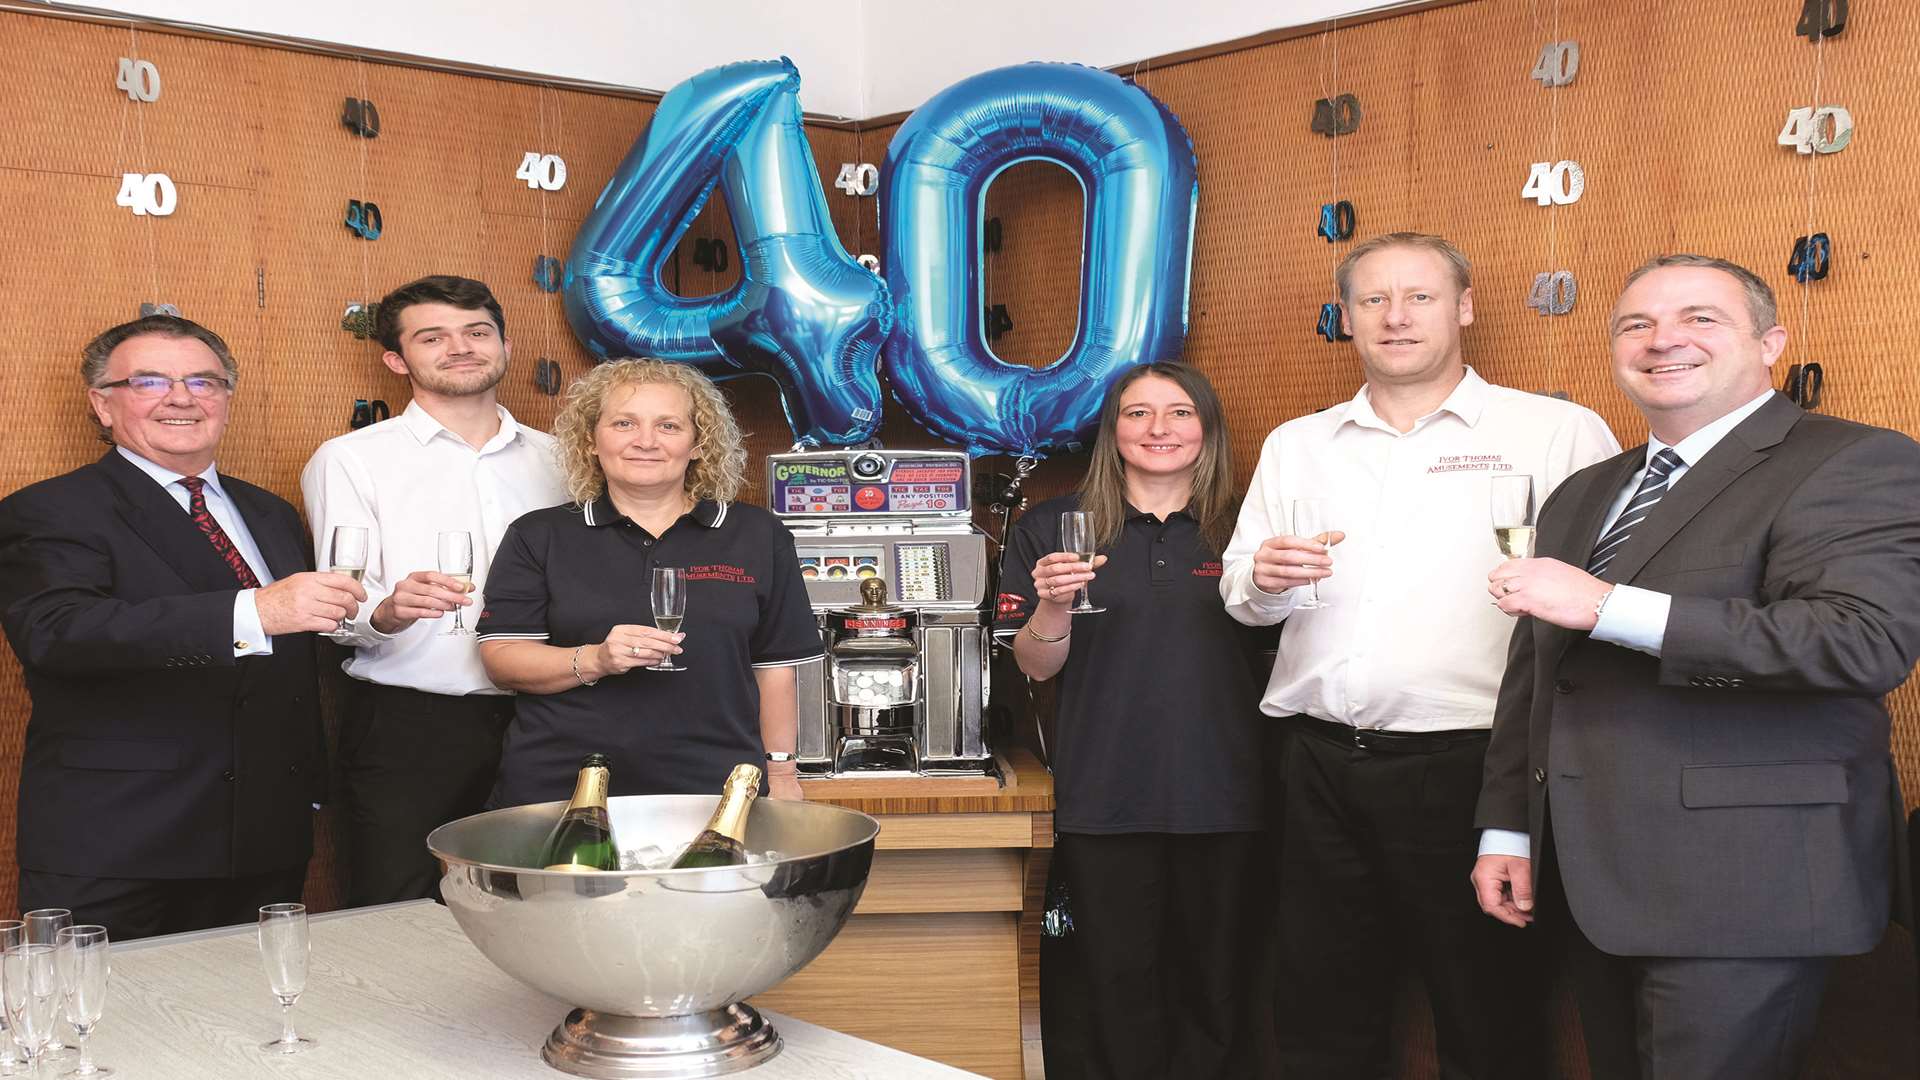 Ivor Thomas, left, with Paul Thomas, right, and some of the team celebrating 40 years